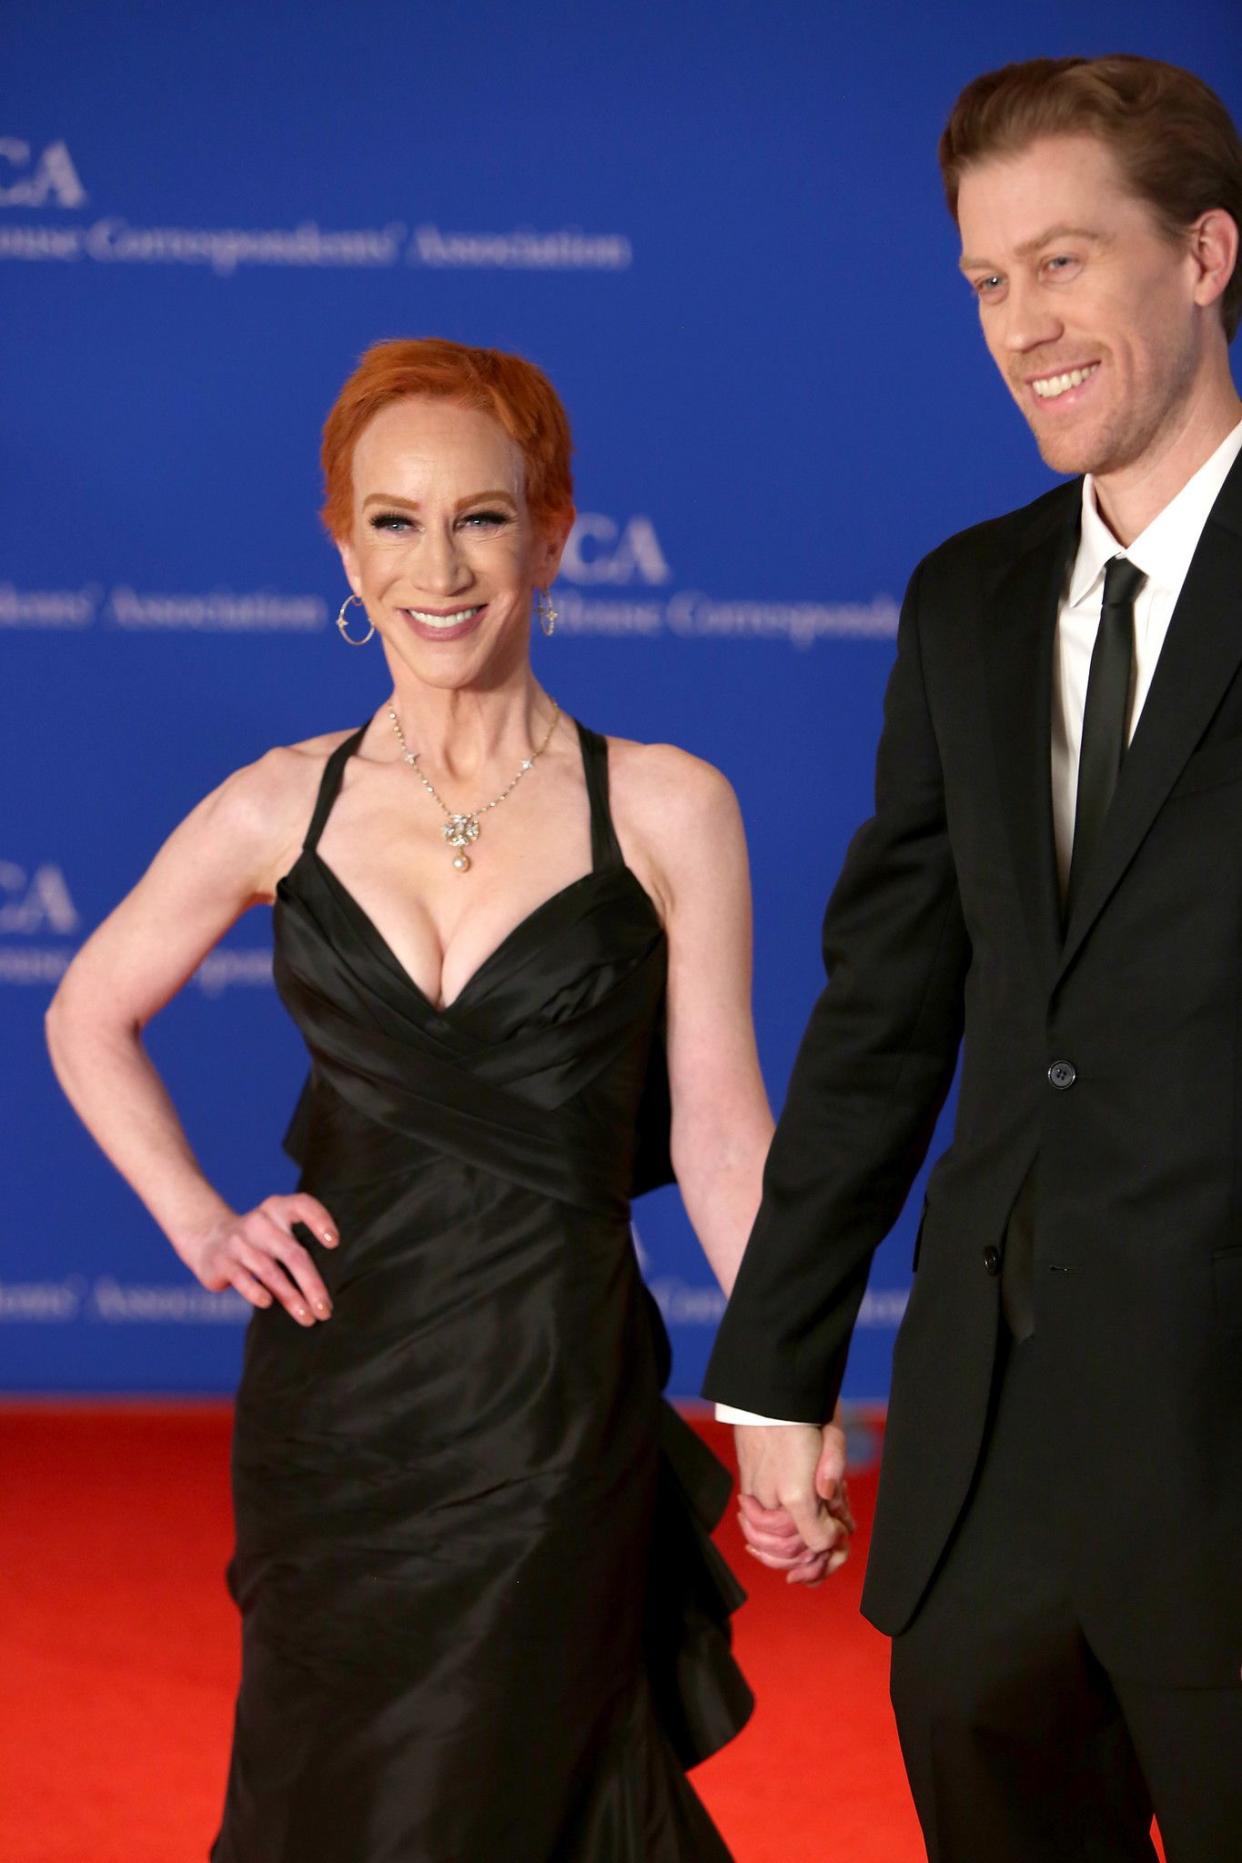 Kathy Griffin announced her split from her boyfriend of seven years Randy Bick in a tweet on Nov. 8, 2018. “God help me, but I¹m gonna be one of those people who announces a break up,” the comedian wrote. “After 7 years, Randy and I have decided to part ways. It's not acrimonious and I will always adore him. There, now those jerks at TMZ wont get the story first. Go back to your bootlicking, @HarveyLevinTMZ”. The two met at a wine festival in 2011 and have dated since then. They shared a home in Bel Air, California and had two dogs.